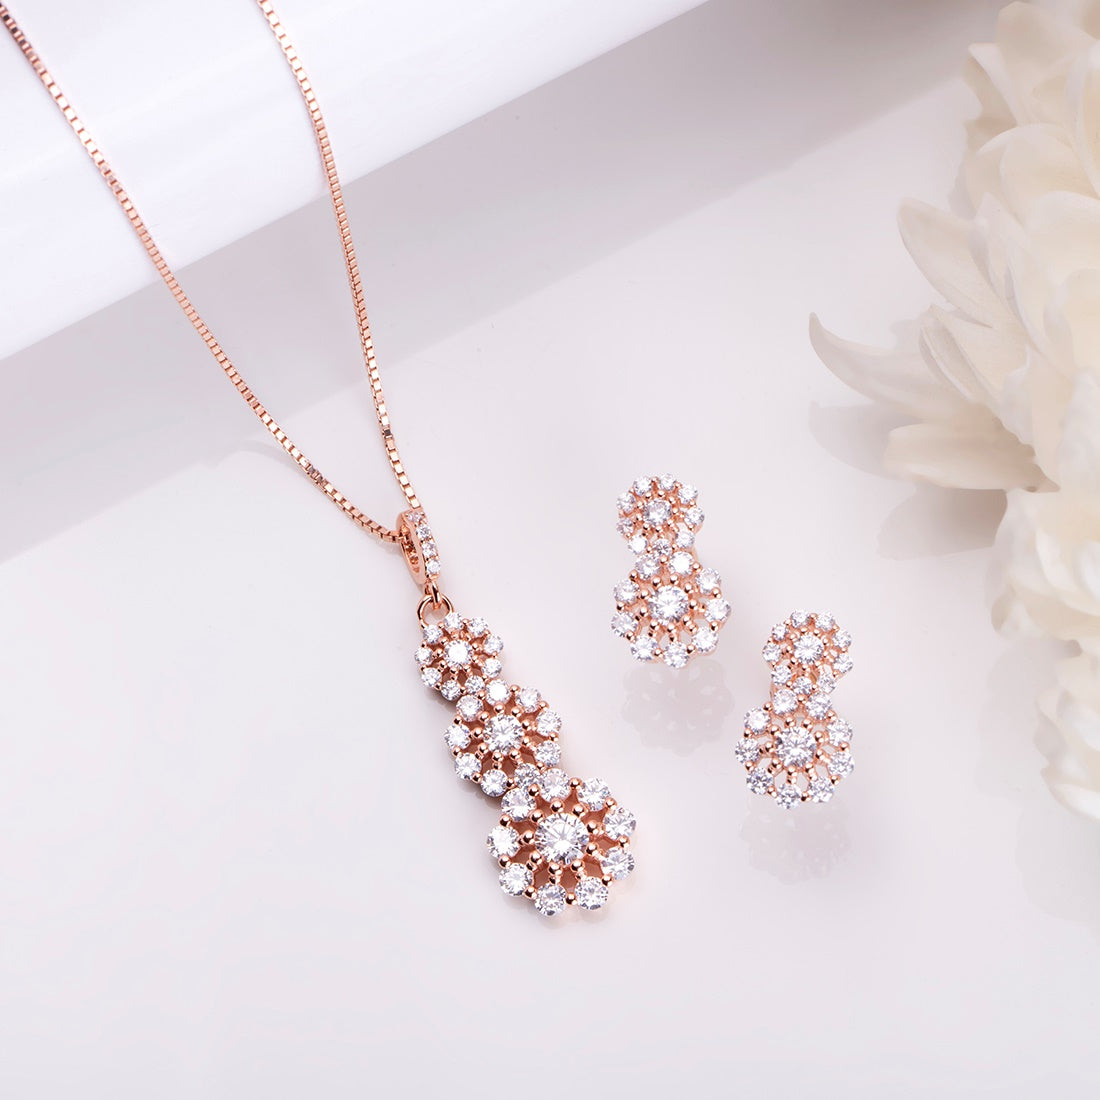 Blooming Beauty 925 Sterling Silver Rose gold Plated Jewelry Set